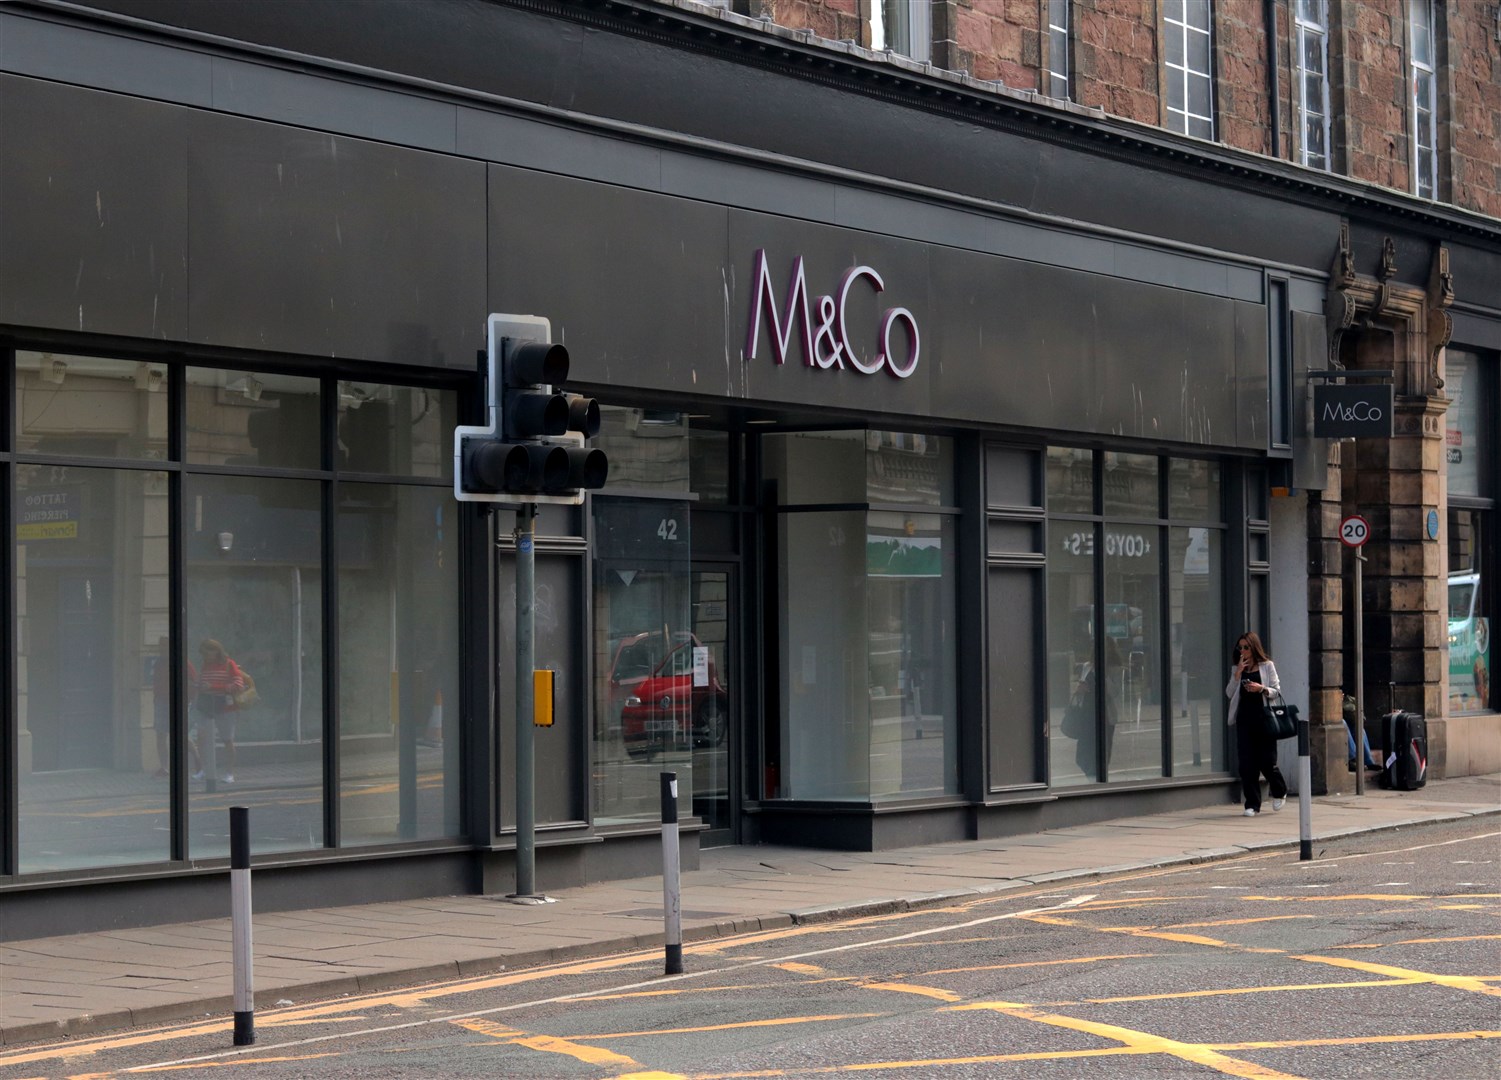 Could the former M&Co store in Academy Street be the location of a new Inverness branch for The Original Factory Shop?